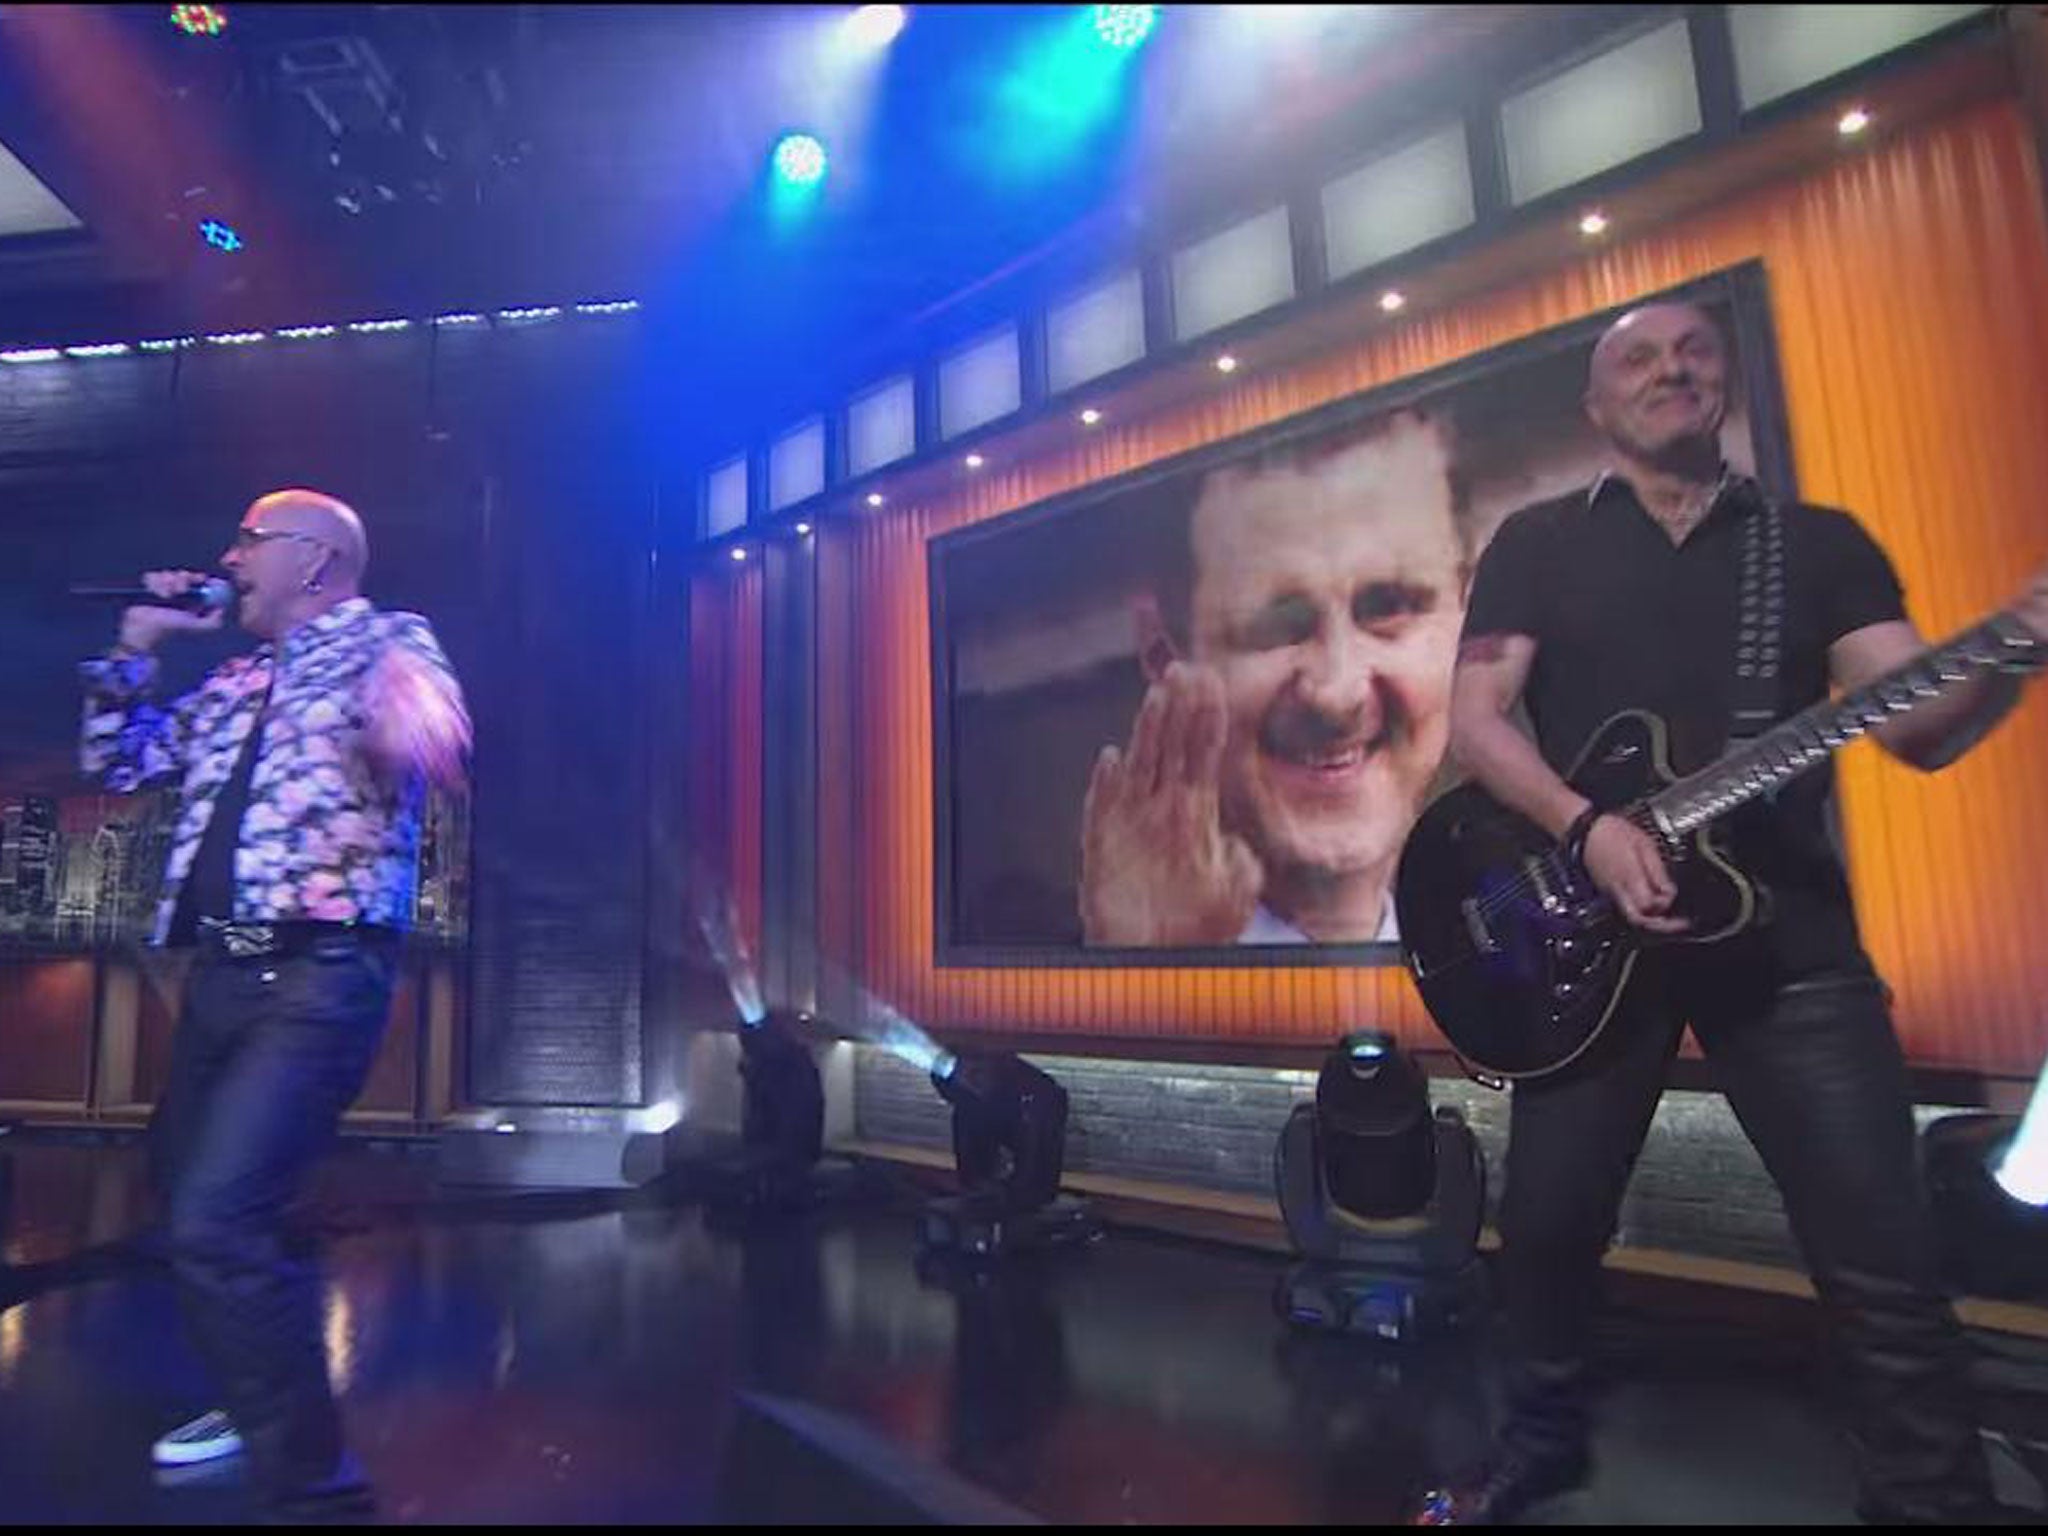 Nineties pop group Right Said Fred revisited their classic song I’m Too Sexy to deliver a scathing version of I’m Too Sexy especially for Bashir al-Assad on the Last Week Tonight show